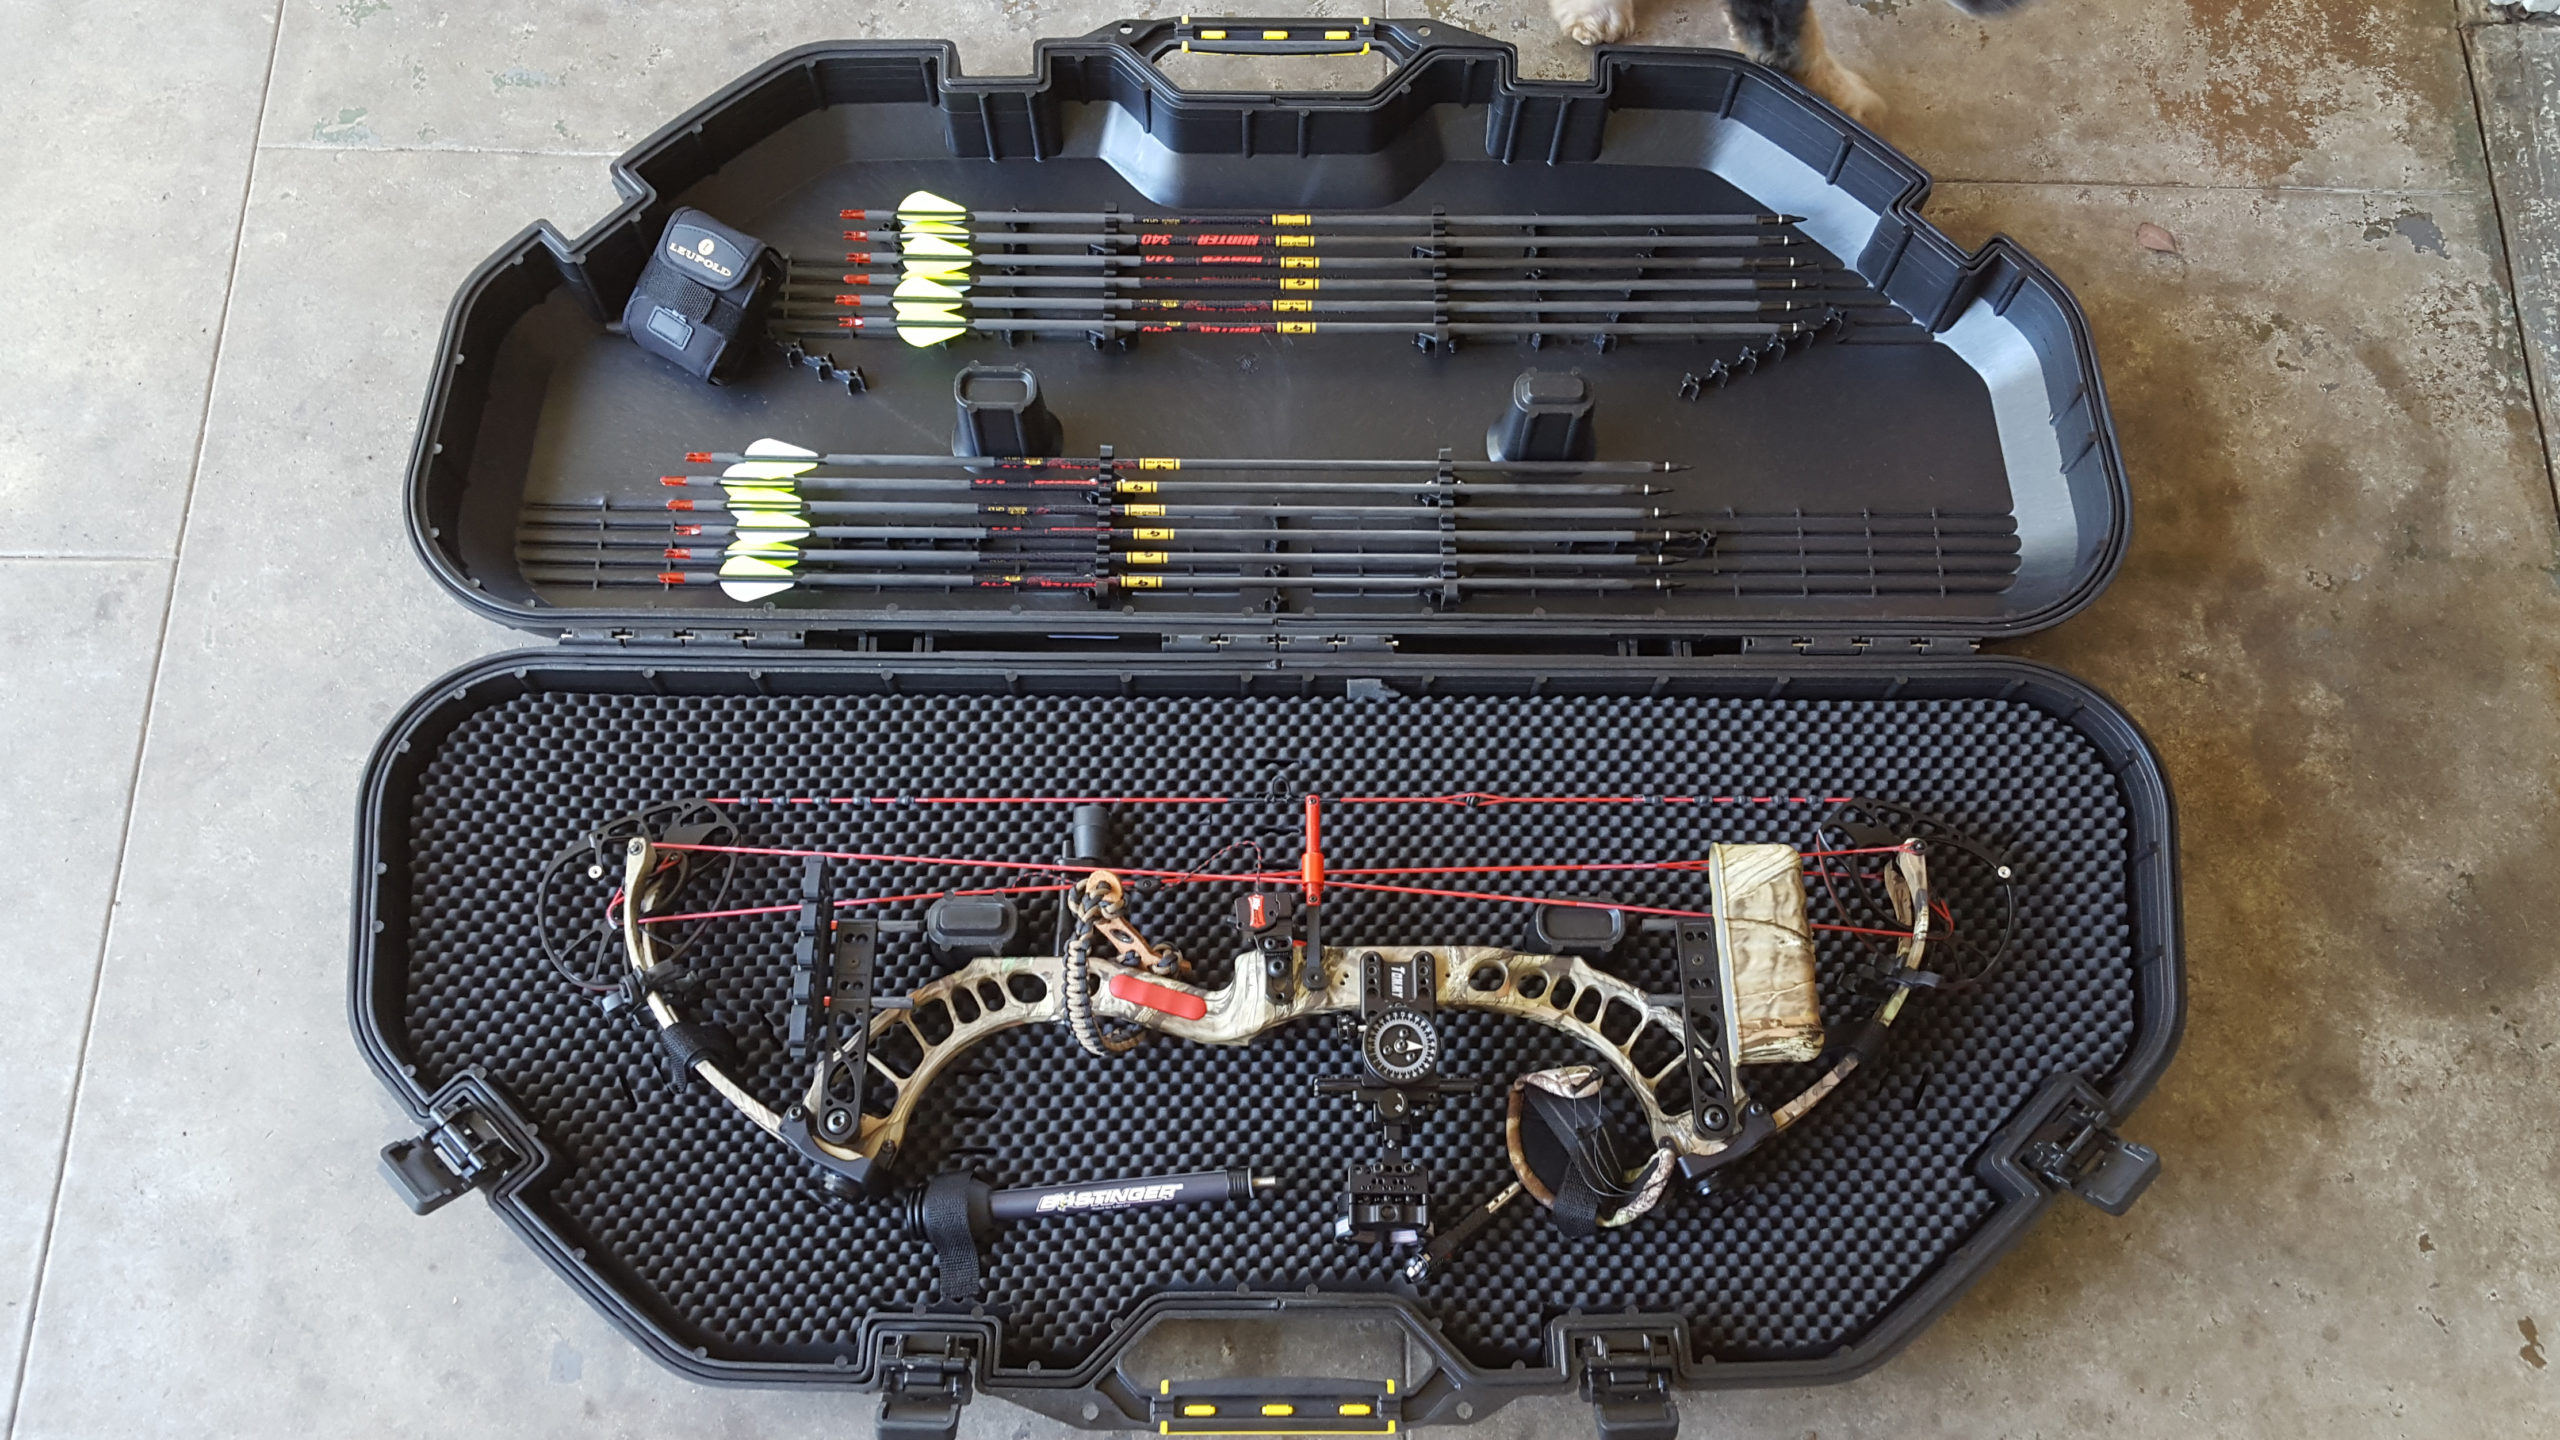 How Compound Bows Work And What You Need To Know To Shoot One